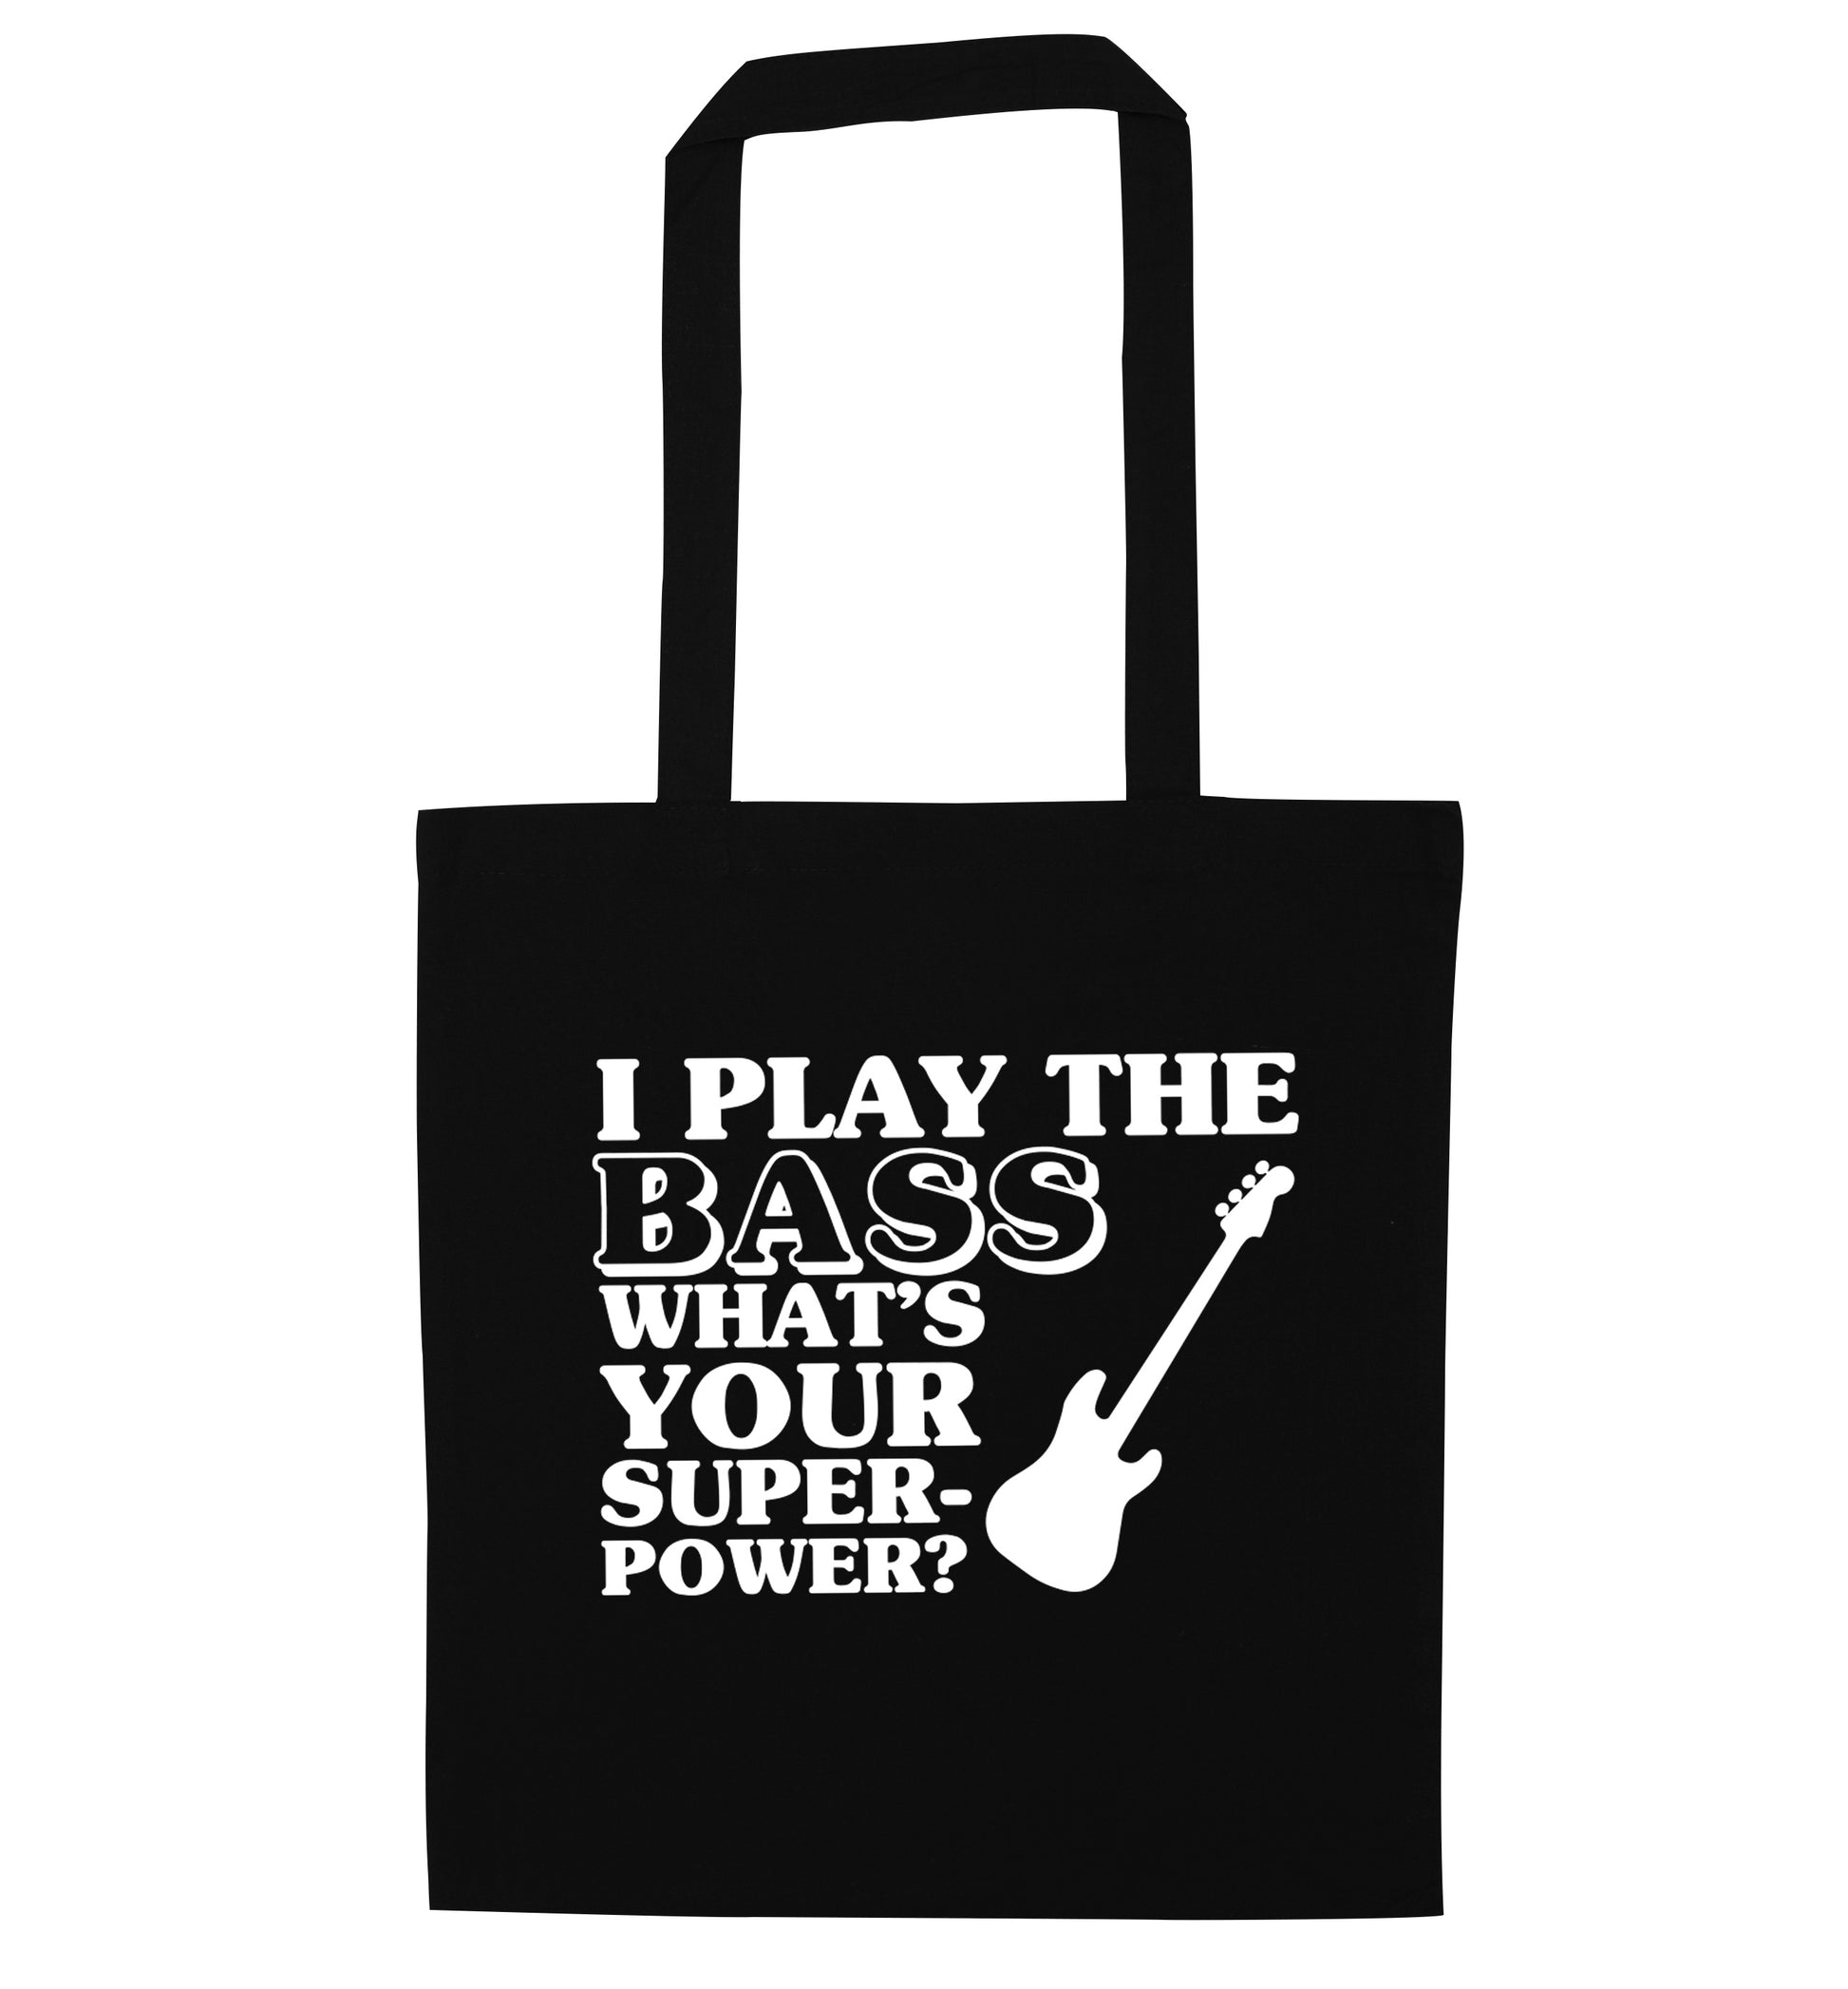 I play the bass what's your superpower? black tote bag